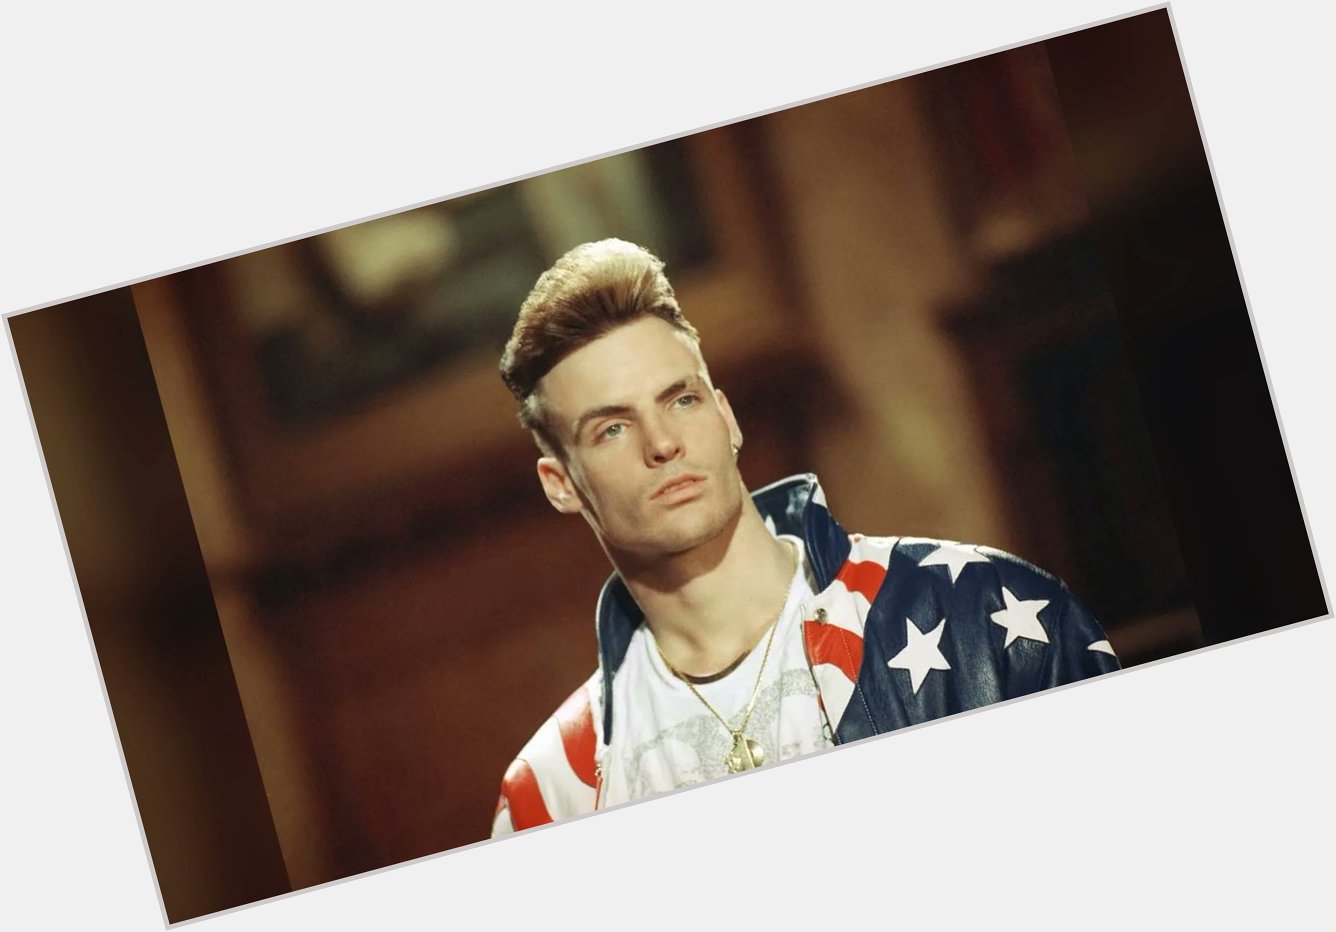 Happy birthday vanilla ice but keep ya clothes on,
anything less than the vest is a felony 